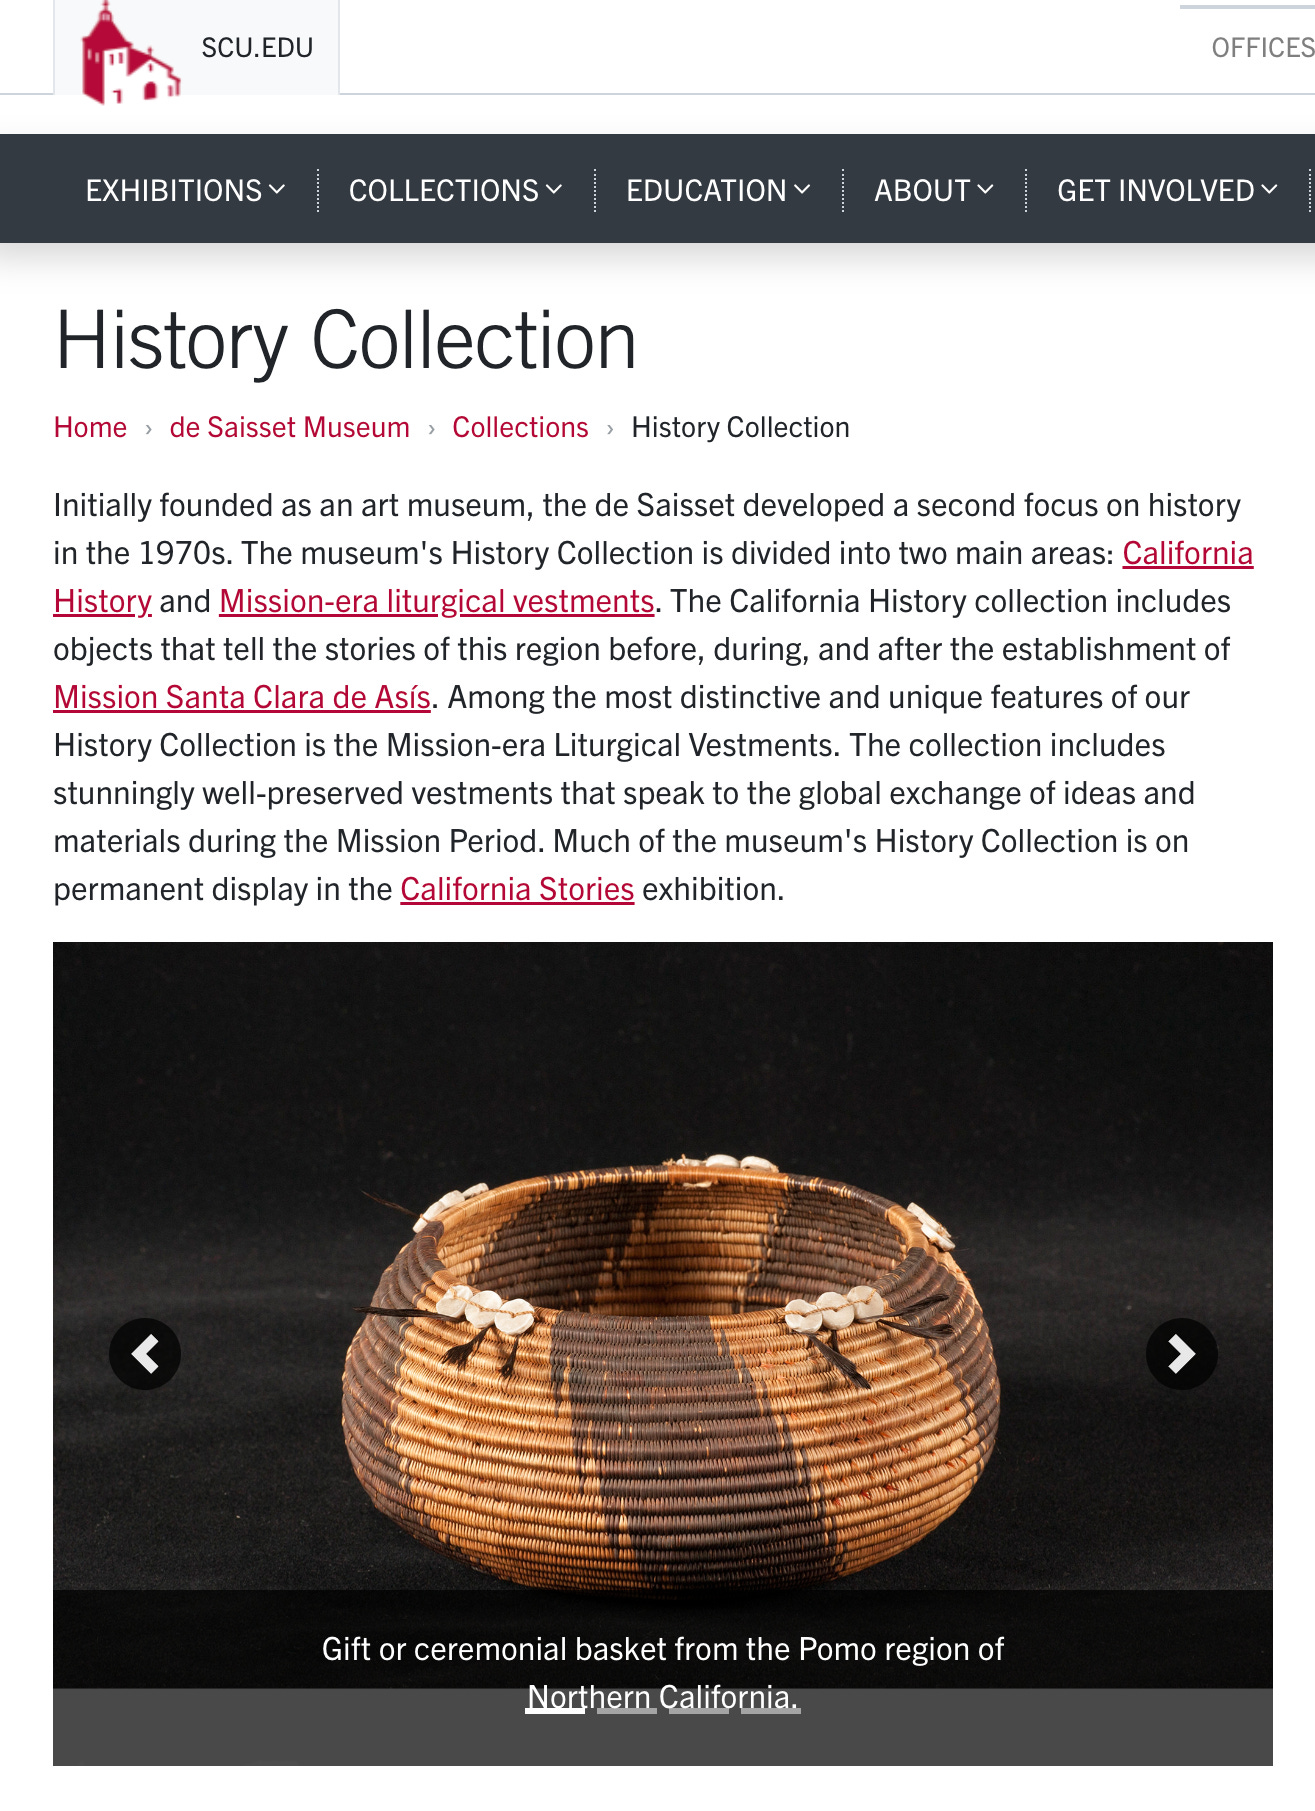 History Collection Home de Saisset Museum Collections History Collection Initially founded as an art museum, the de Saisset developed a second focus on history in the 1970s. The museum's History Collection is divided into two main areas: California History and Mission-era liturgical vestments. The California History collection includes objects that tell the stories of this region before, during, and after the establishment of Mission Santa Clara de Asís. Among the most distinctive and unique features of our History Collection is the Mission-era Liturgical Vestments. The collection includes stunningly well-preserved vestments that speak to the global exchange of ideas and materials during the Mission Period. Much of the museum's History Collection is on permanent display in the California Stories exhibition.